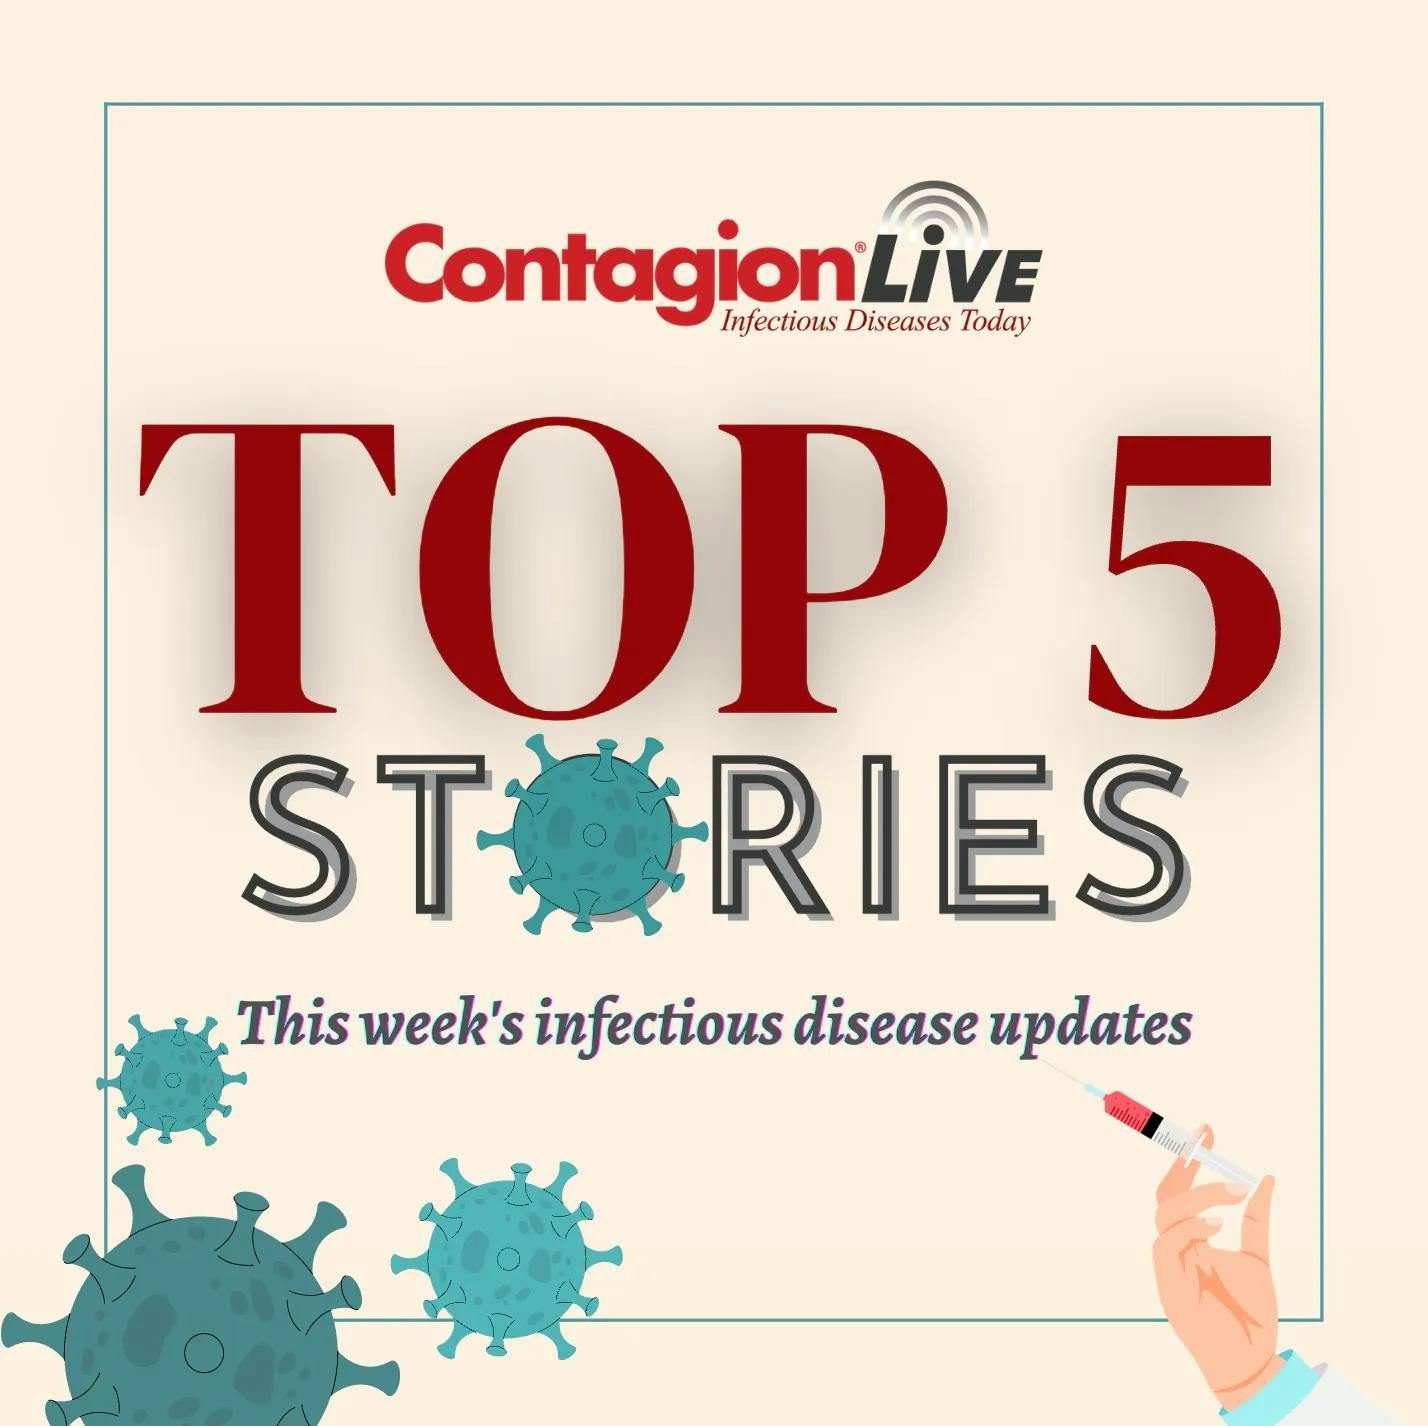 Infectious Disease News for This Week